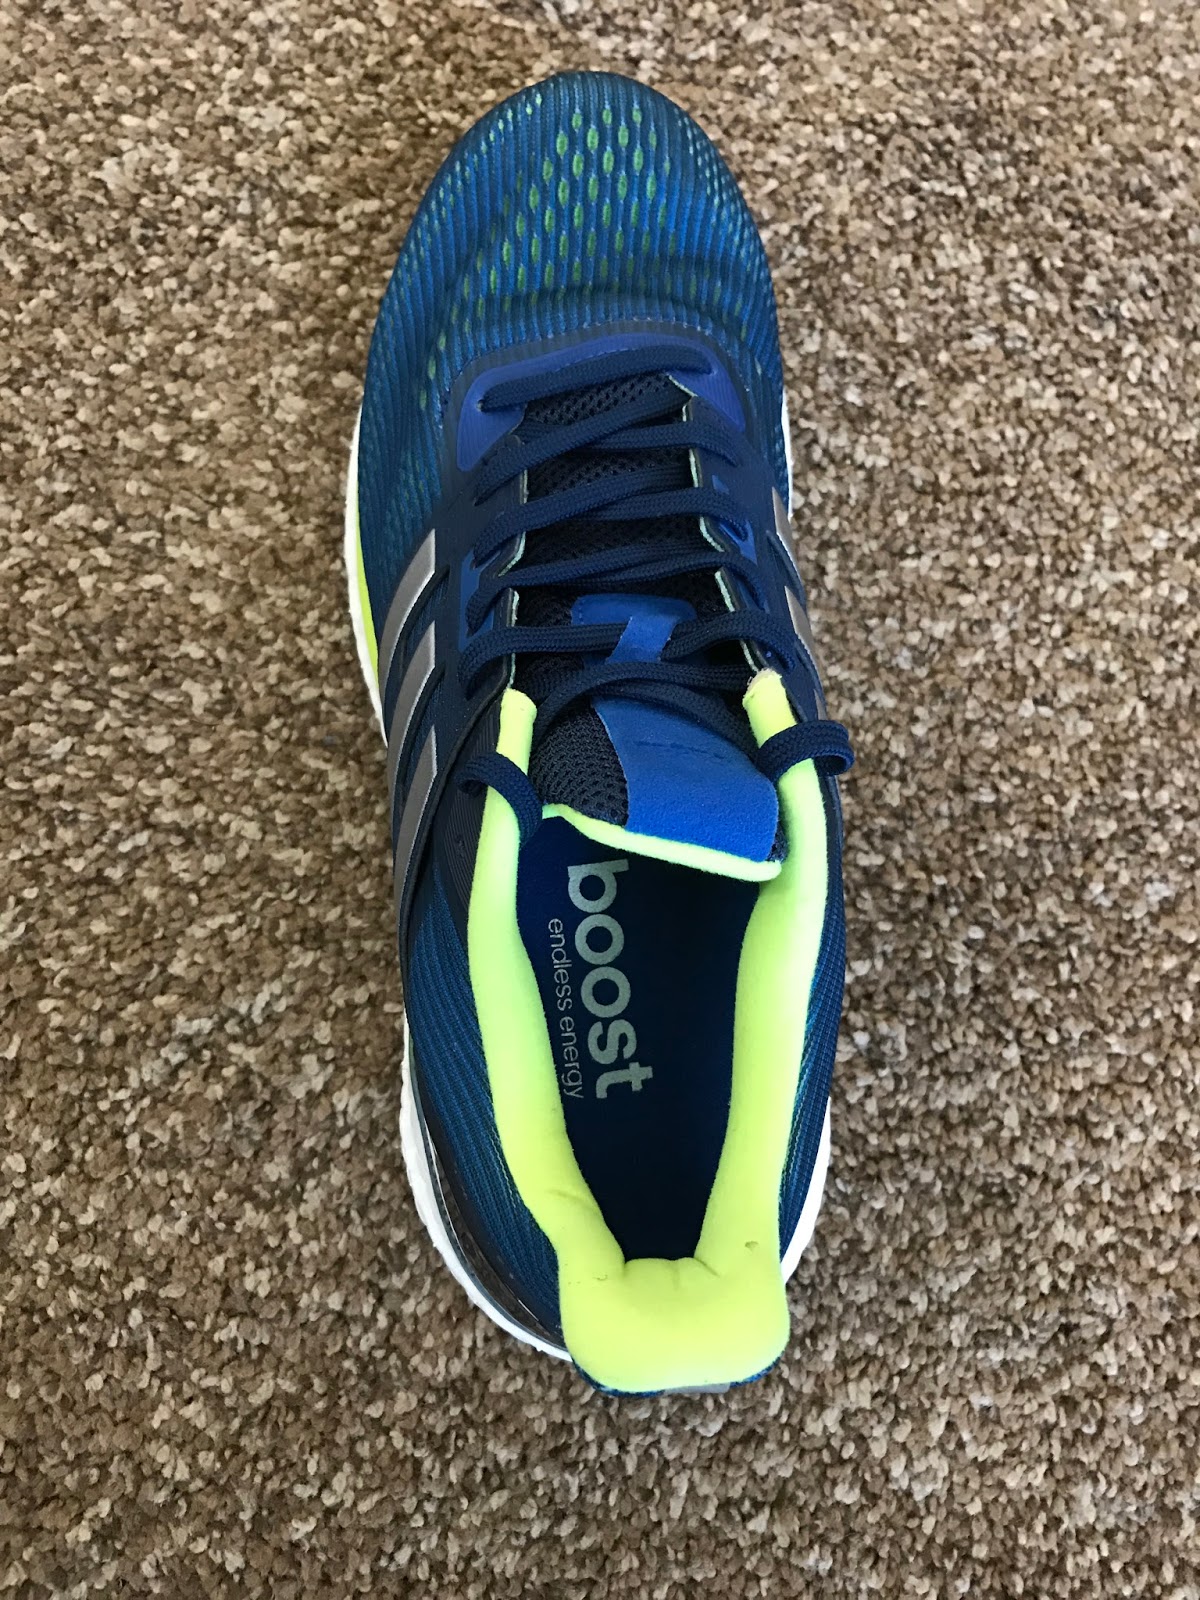 Road Trail and Comparisons: Nike Zoom 12, Brooks Ghost 9, and adidas Supernova Glide 9